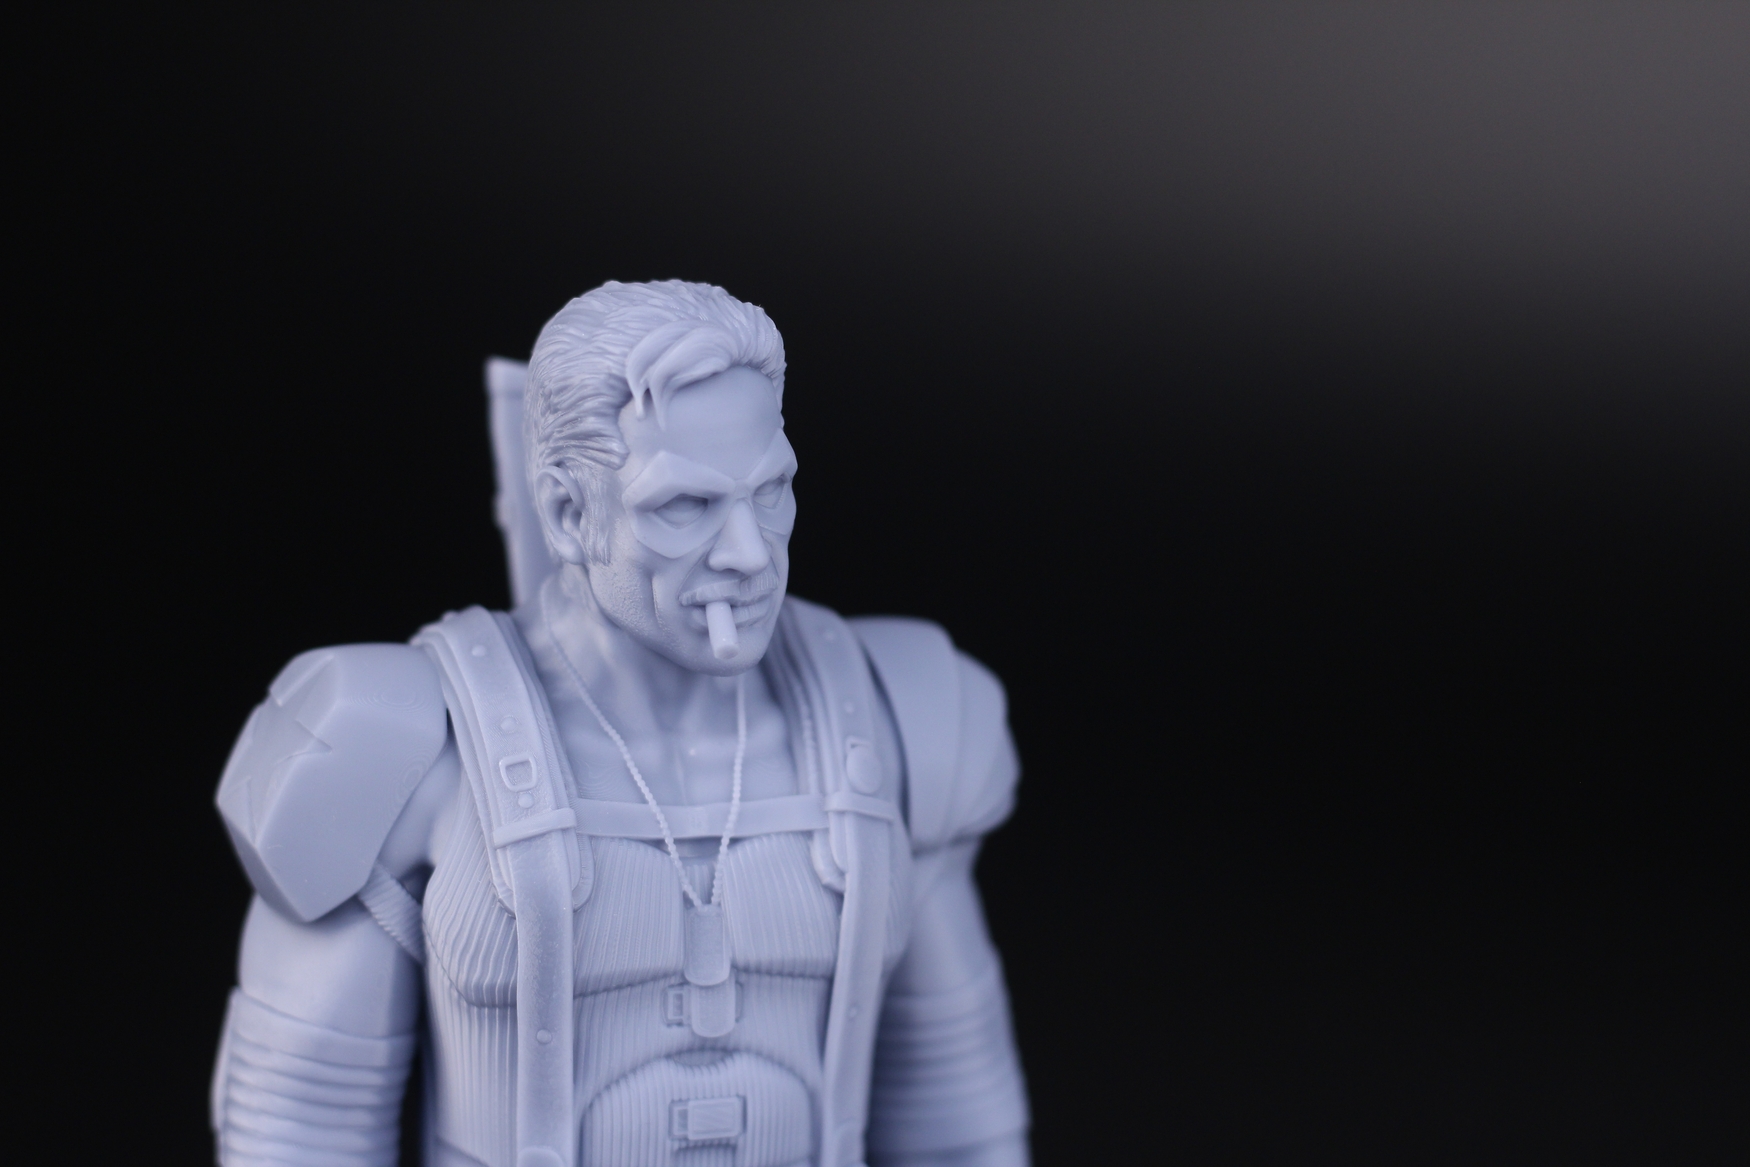 Anycubic M3 Review The Comedian bust form Fotis Mint8 | Anycubic Photon M3 Review: Bridging the gap